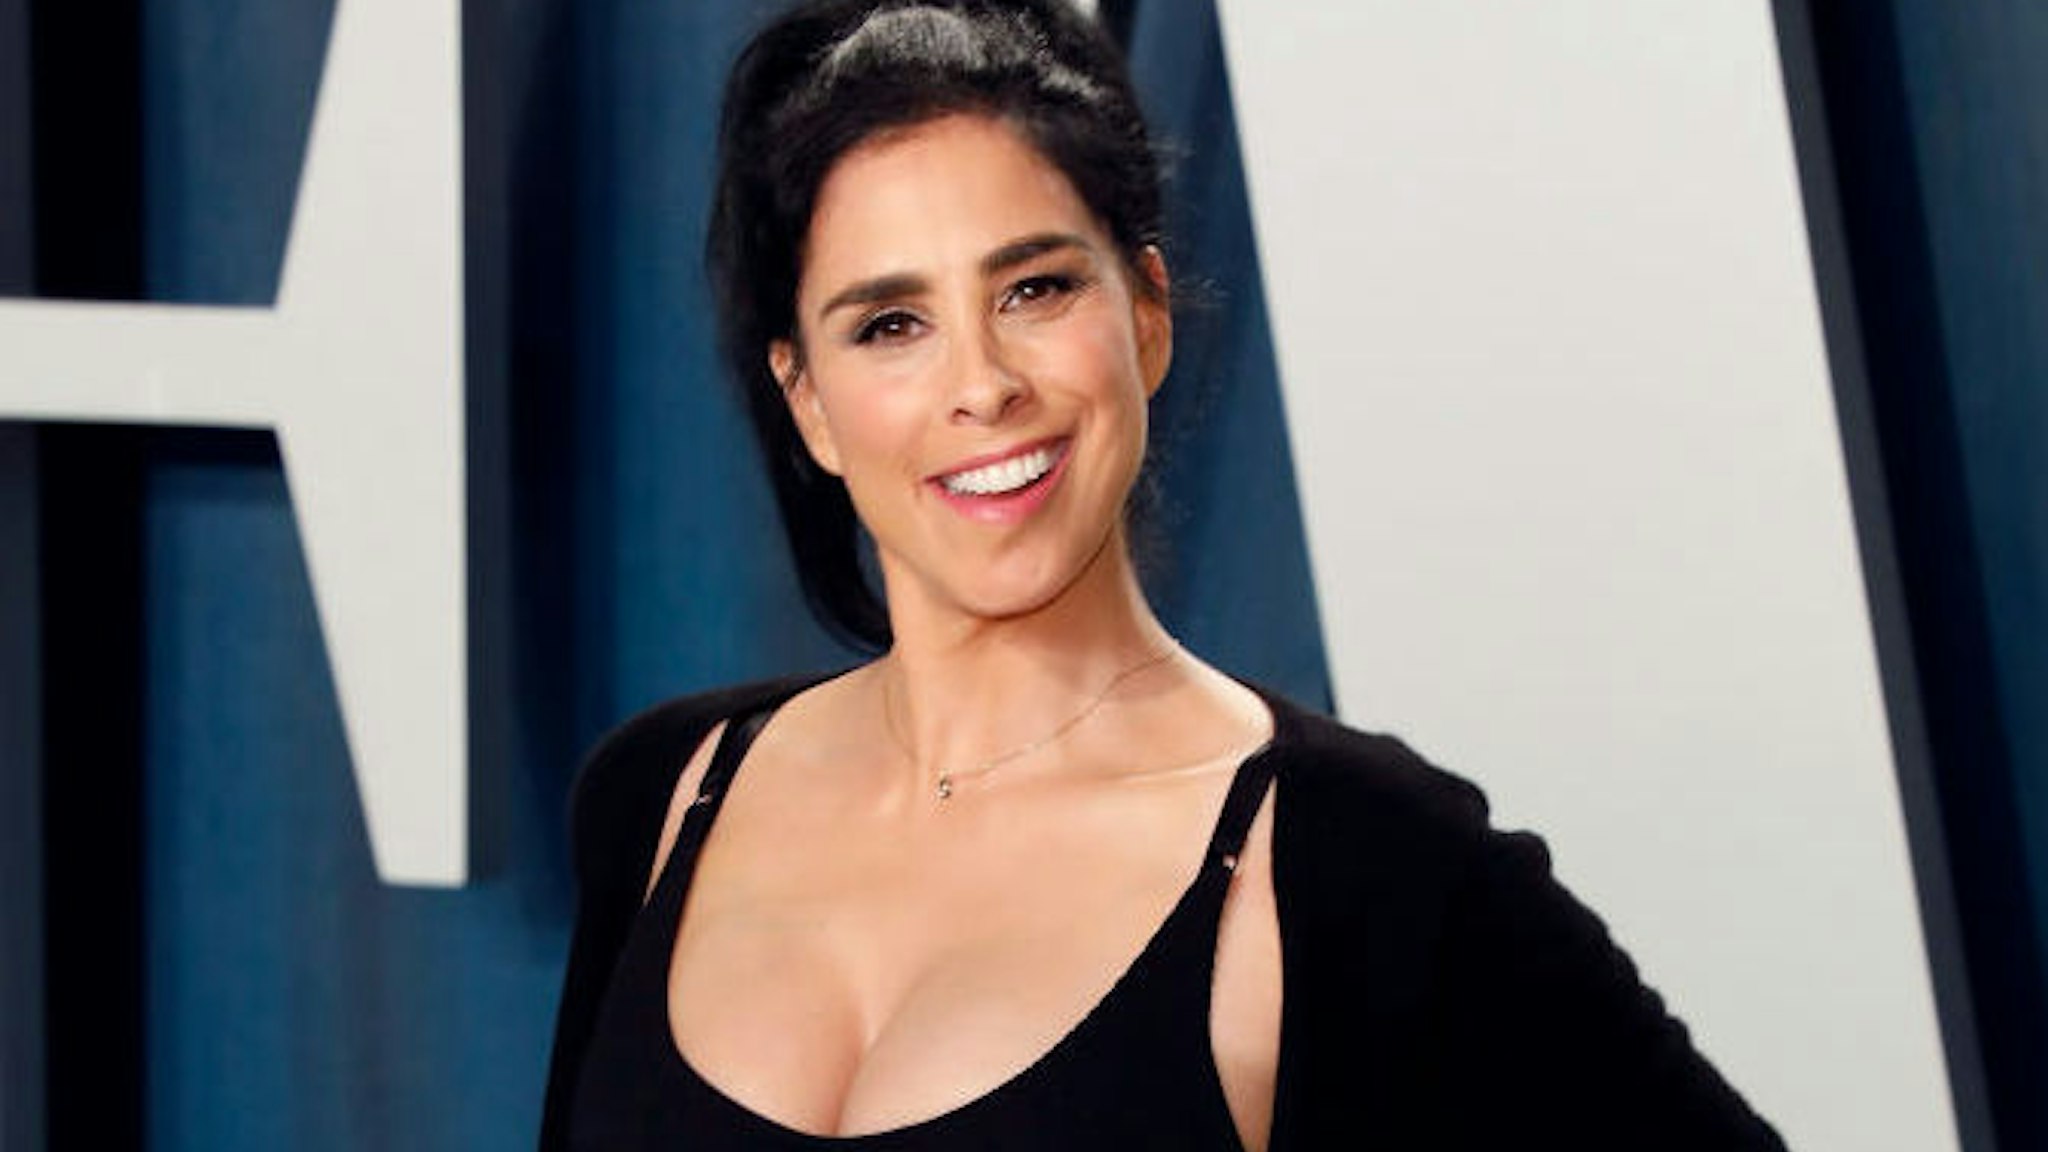 Sarah Silverman attends the Vanity Fair Oscar Party at Wallis Annenberg Center for the Performing Arts on February 09, 2020 in Beverly Hills, California.